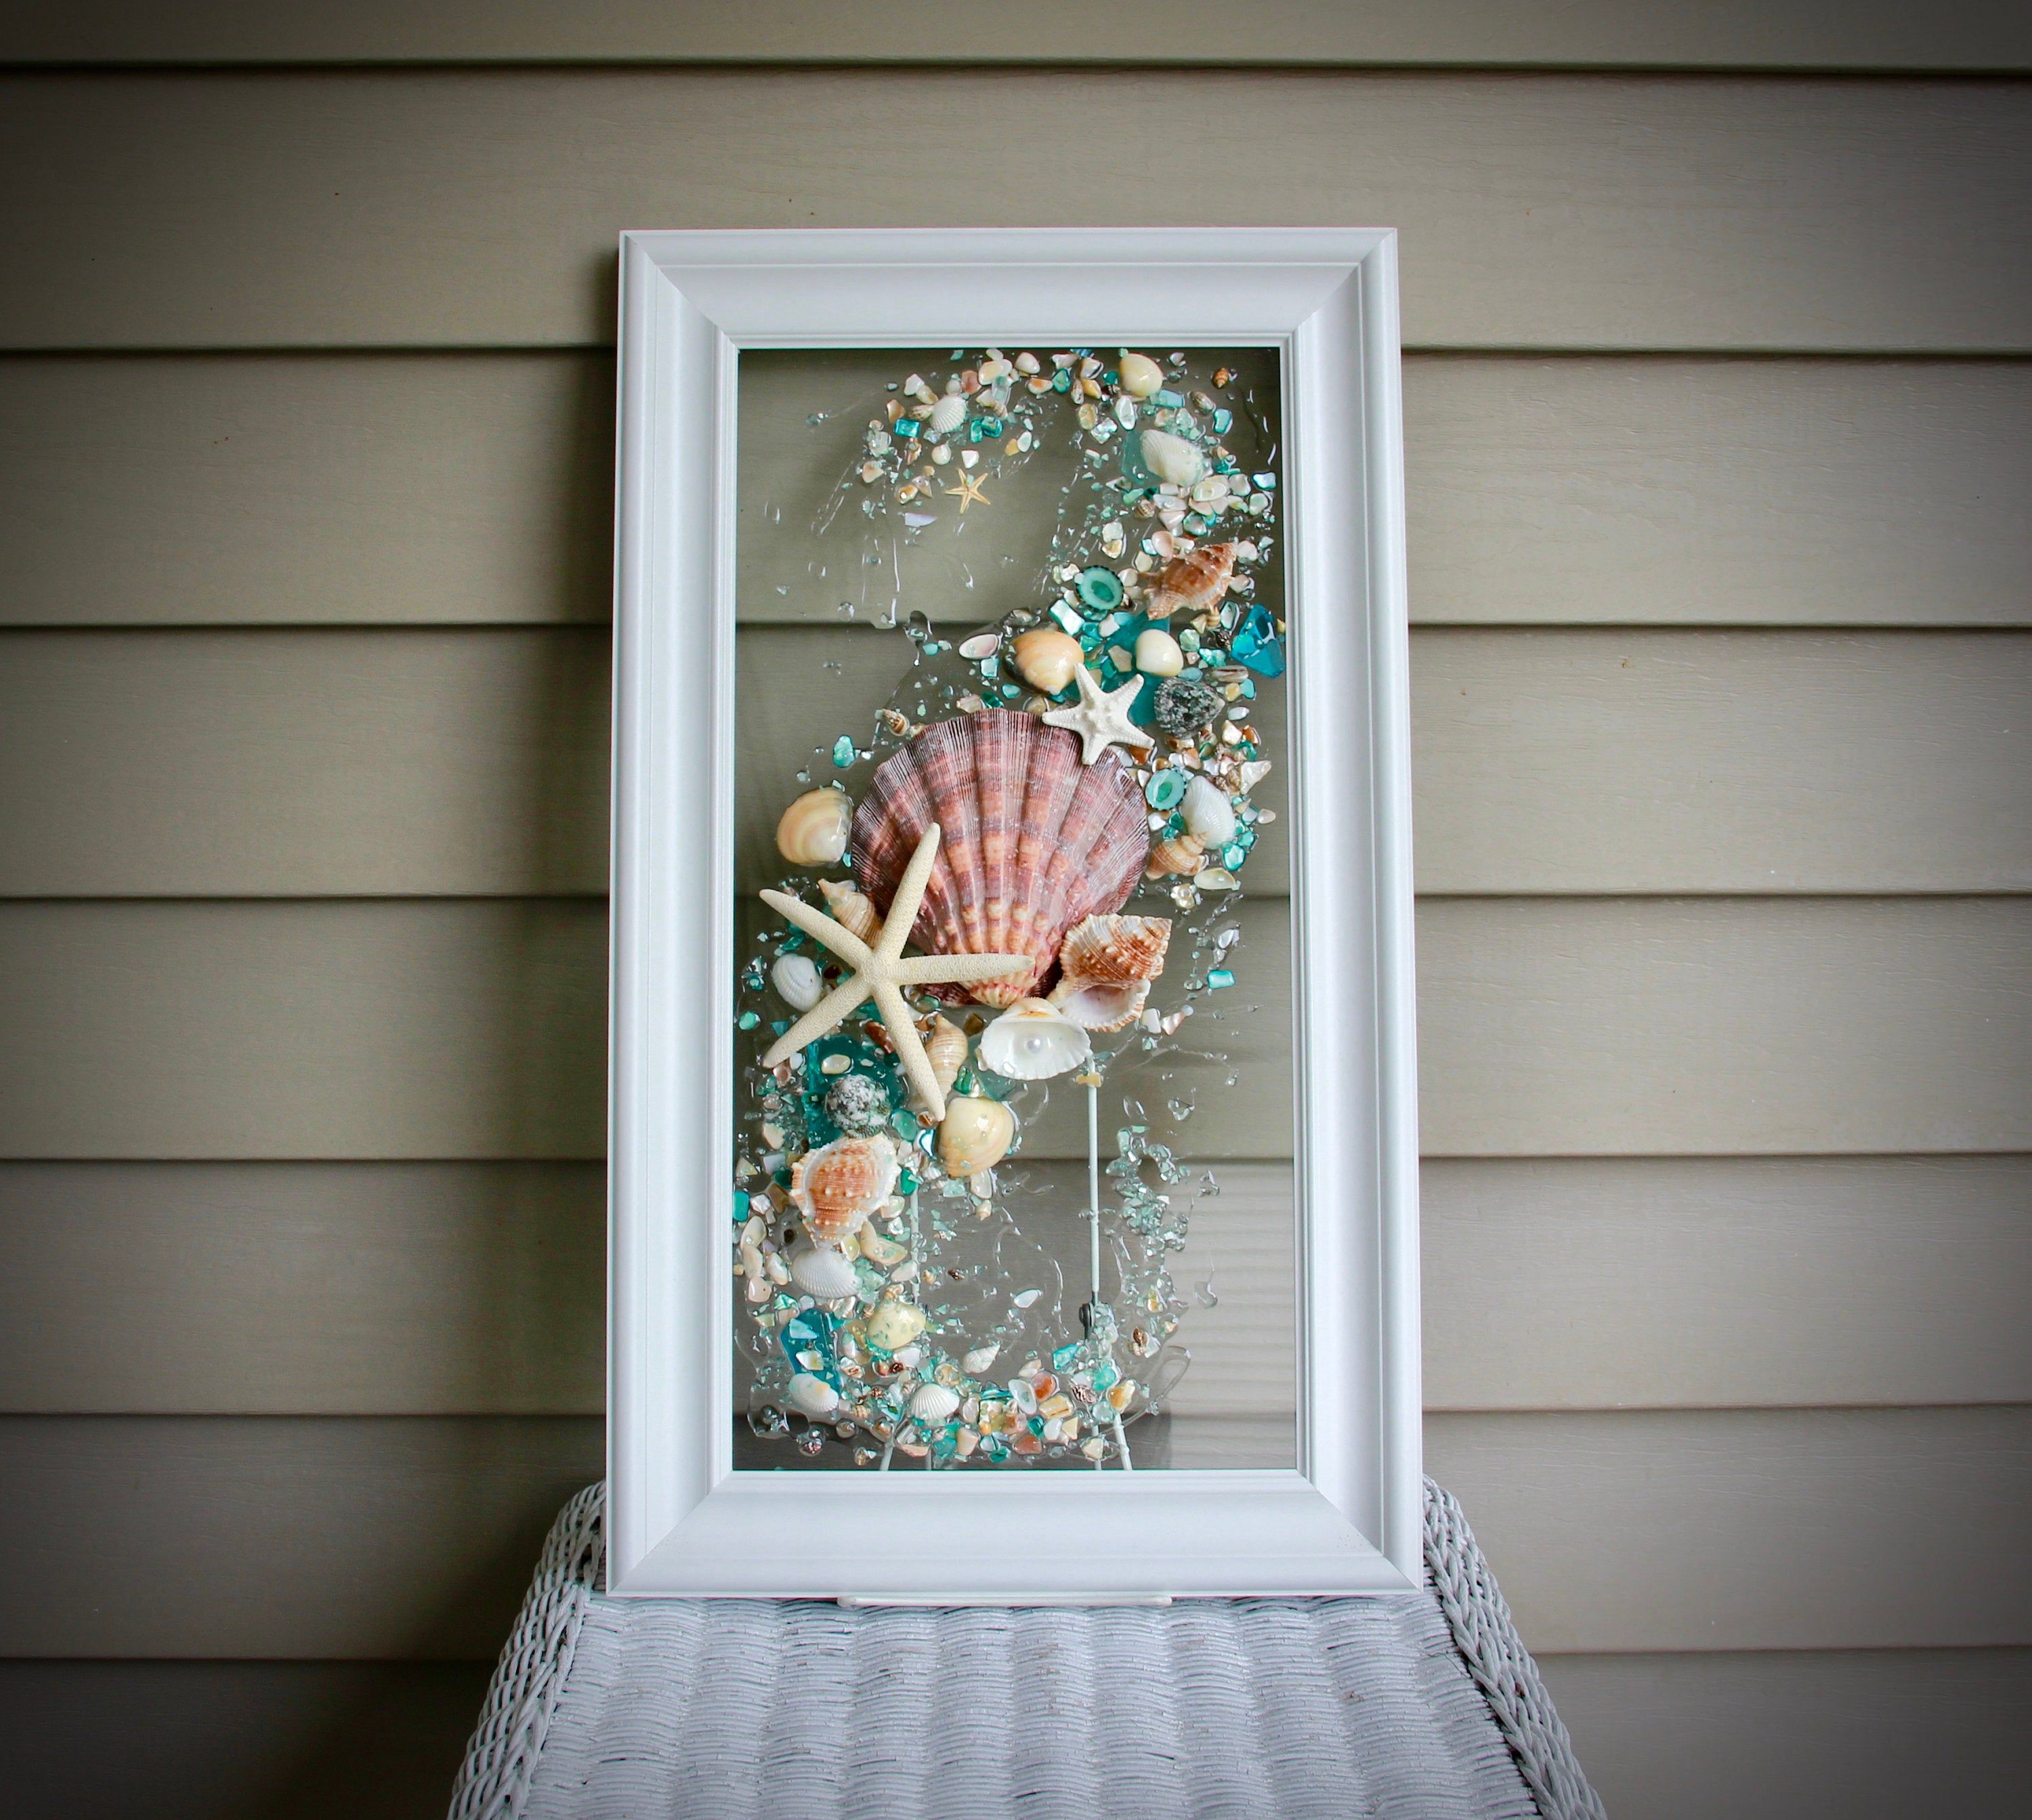 Ocean Decor: Bringing The Sea To Your Home